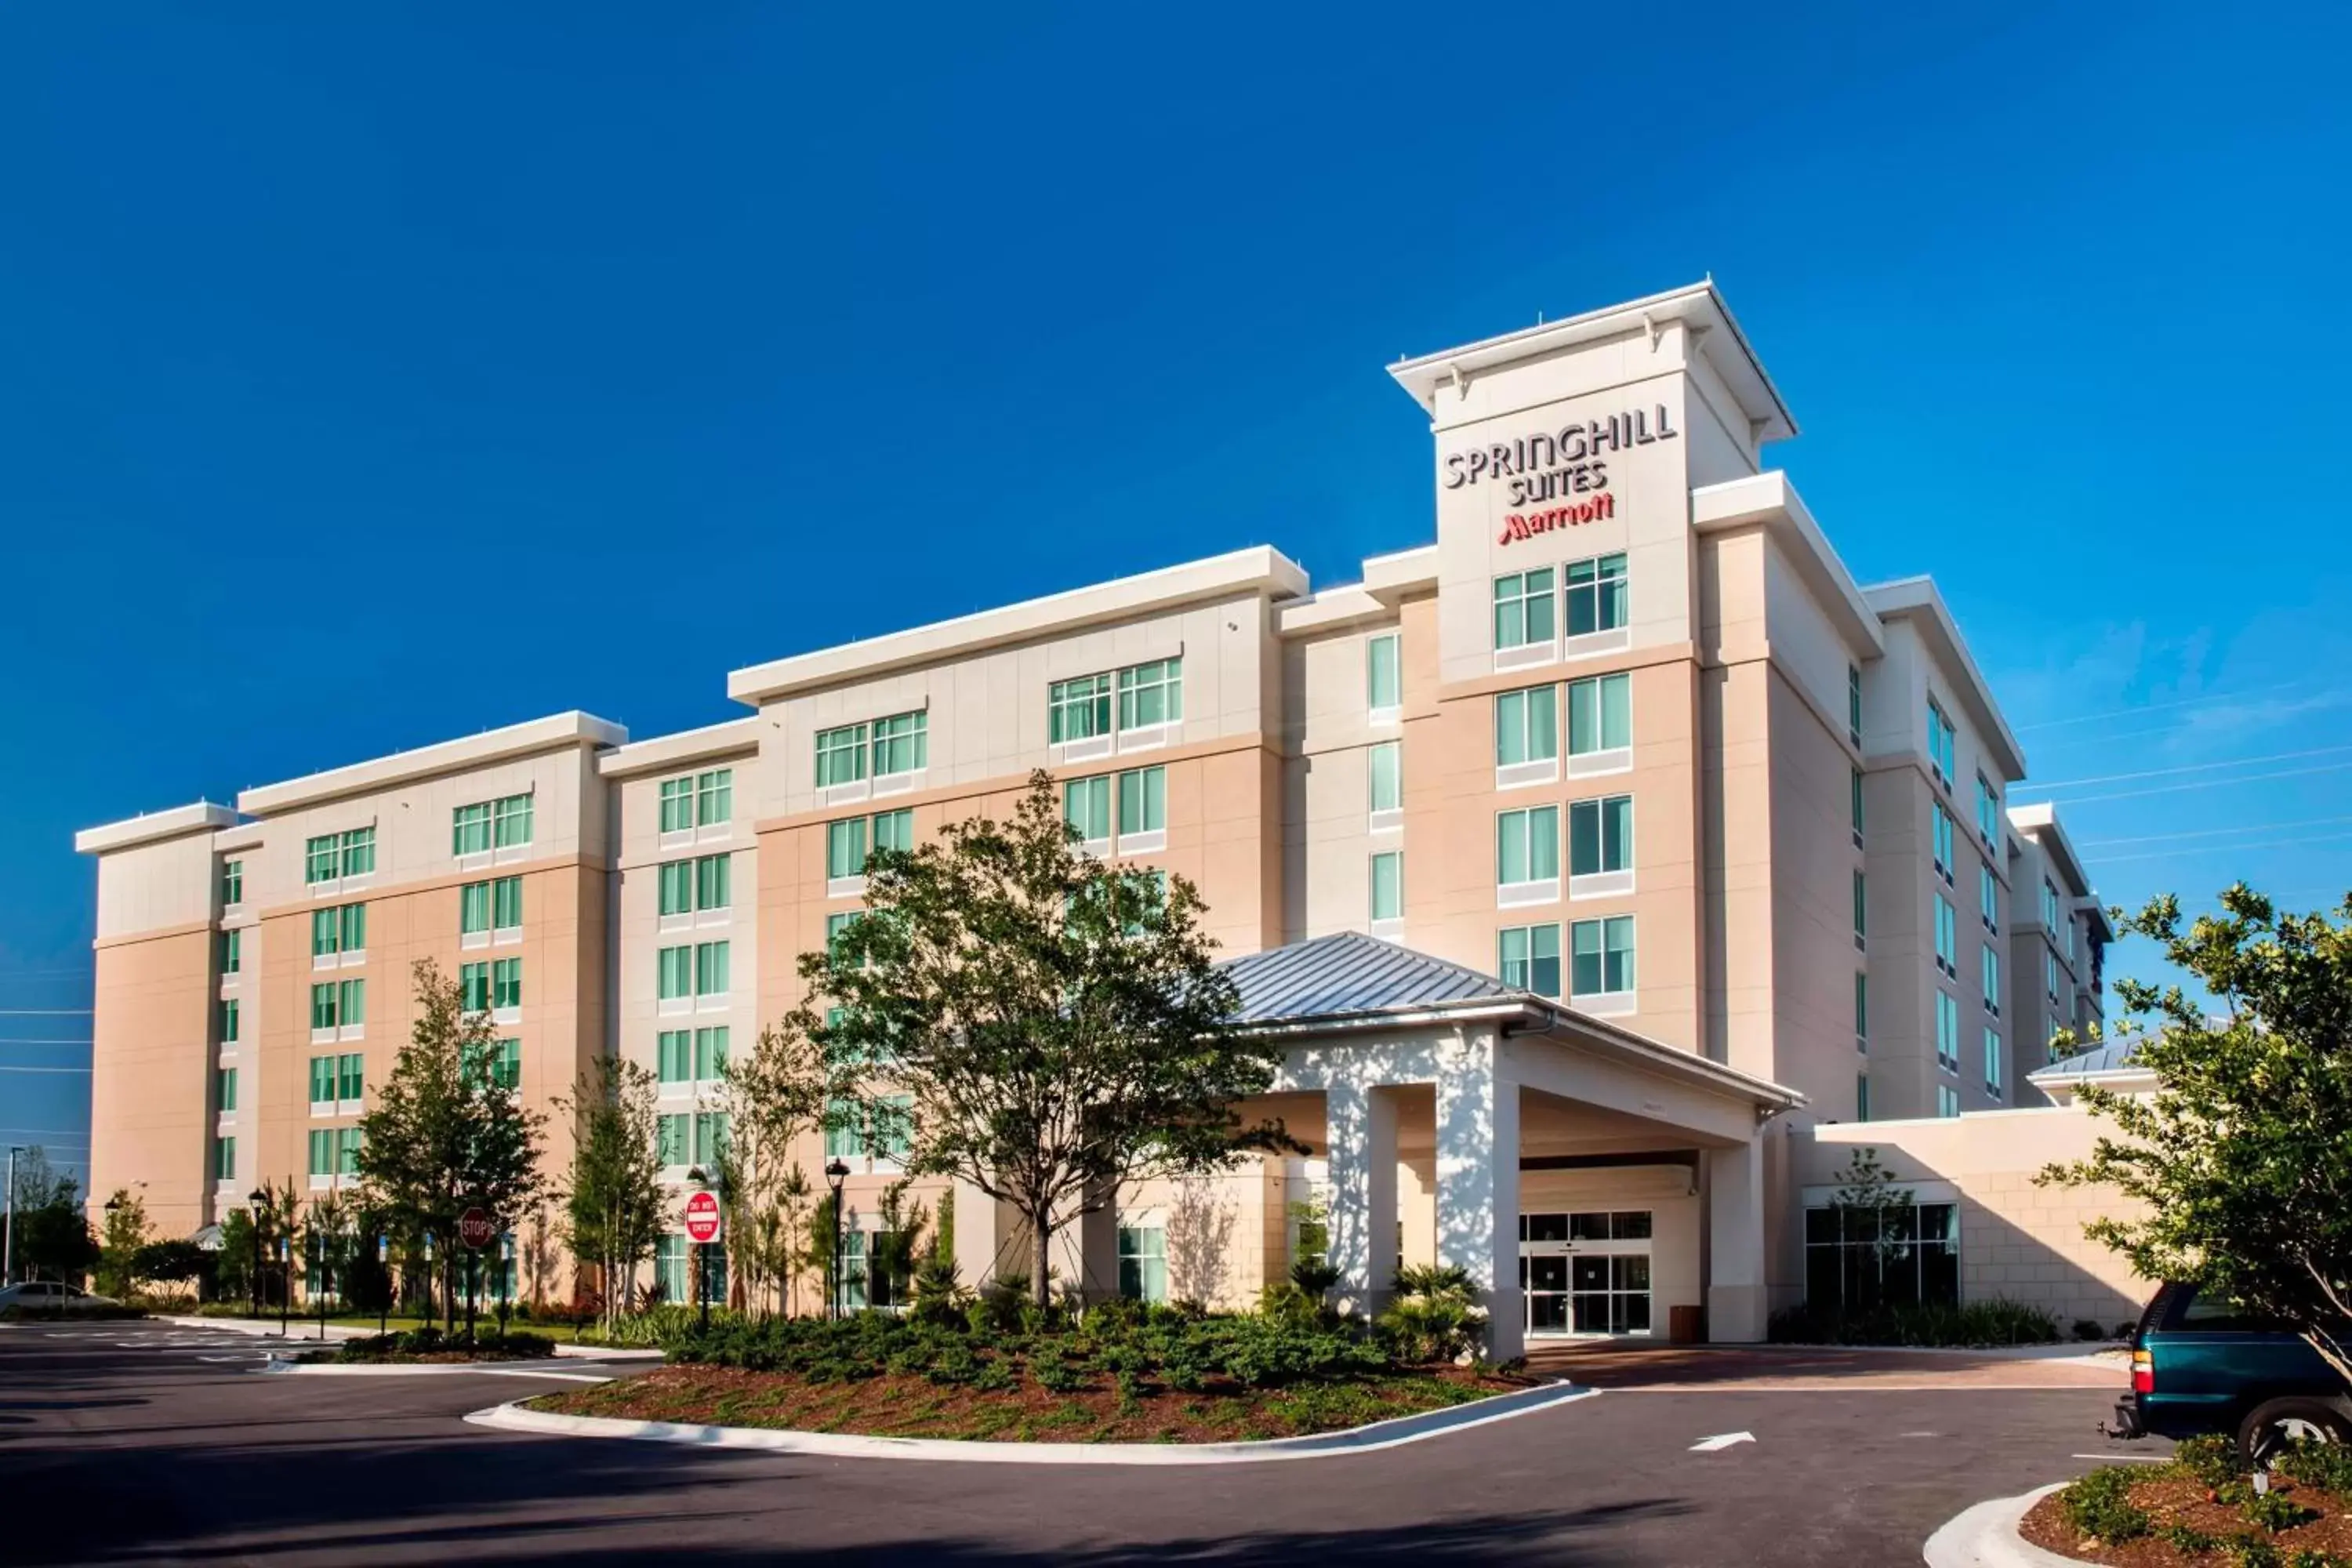 Property Building in SpringHill Suites by Marriott Orlando at FLAMINGO CROSSINGS Town Center-Western Entrance